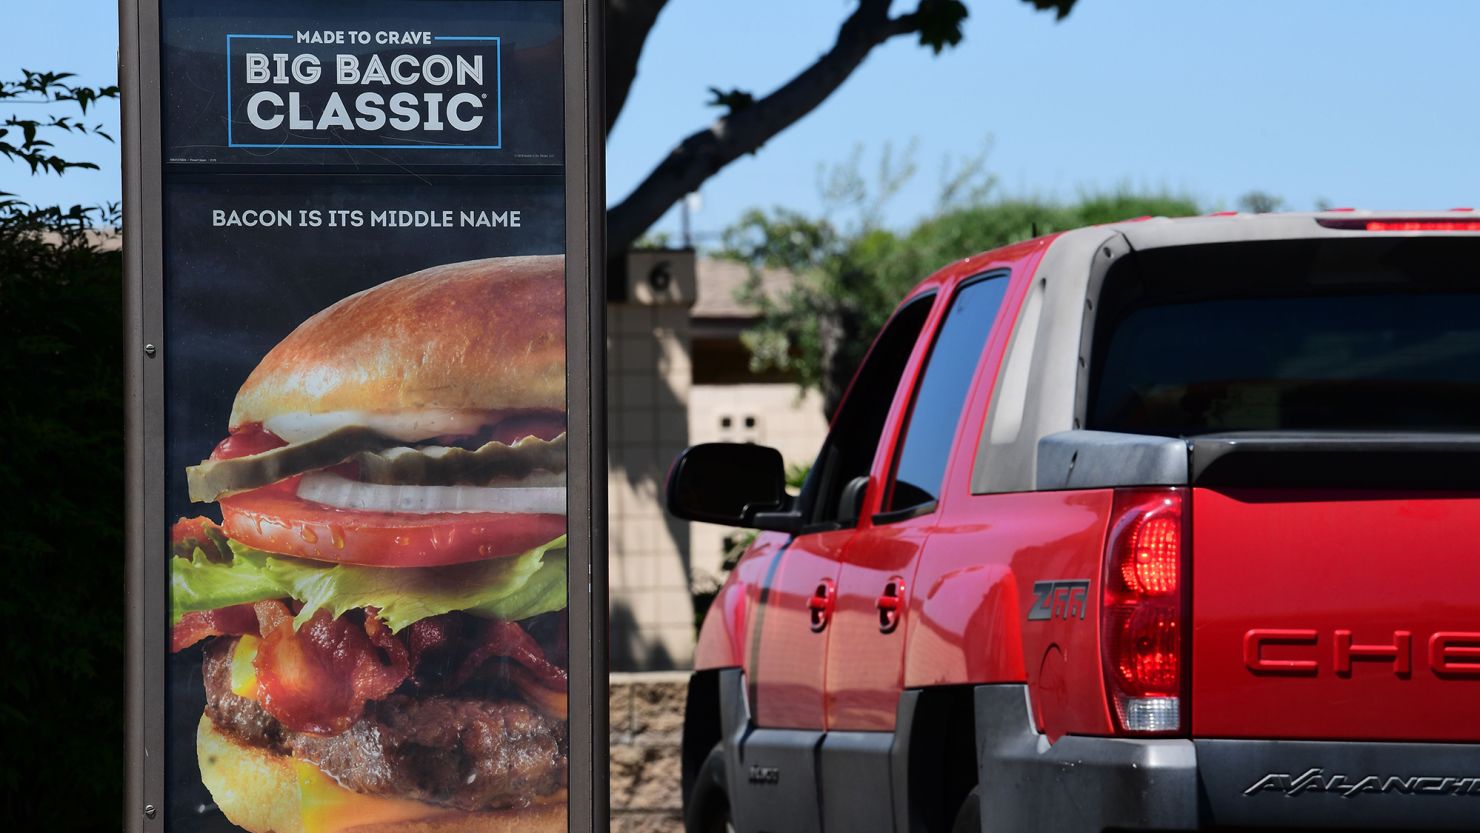 A driver in a vehicle places his order from a drive-thru lane at a Wendy's fast food restaurant in Alhambra, California on May 5, 2020.